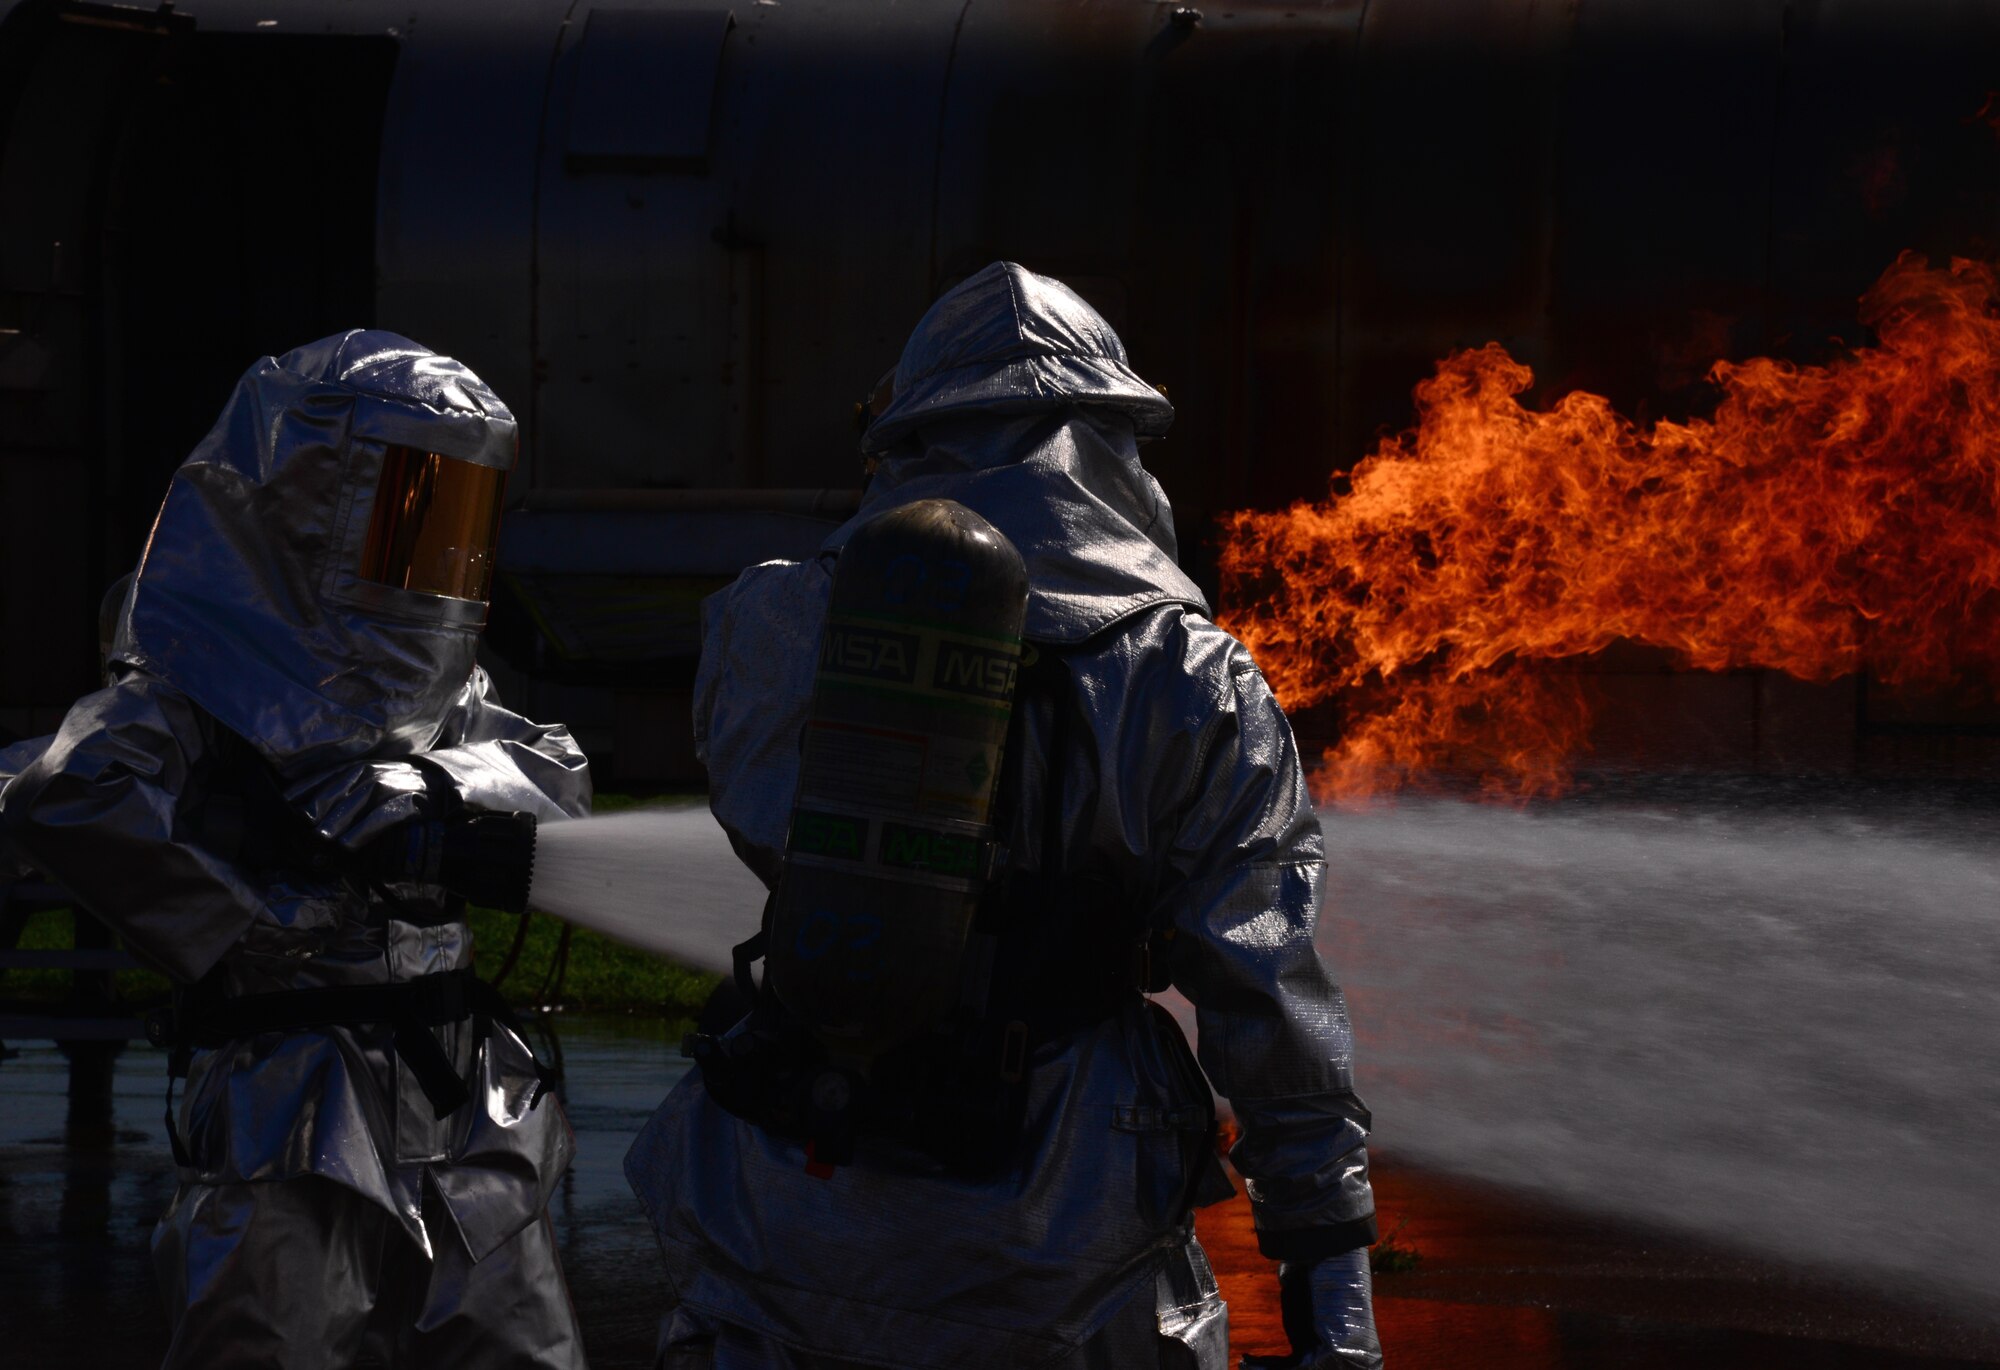 Firefighters from the Songtan fire station perform fire-sweeping maneuvers during a training event Aug 26, 2015, at Osan Air Base, Republic of Korea. After the initial fire is out, the firefighters continue to spray the burn site until all the hot spots were gone and all the flames were out. This process, known as overhaul, is used to ensure the fire won’t start back up. (U. S. Air Force photo by Staff Sgt. Benjamin Sutton) 